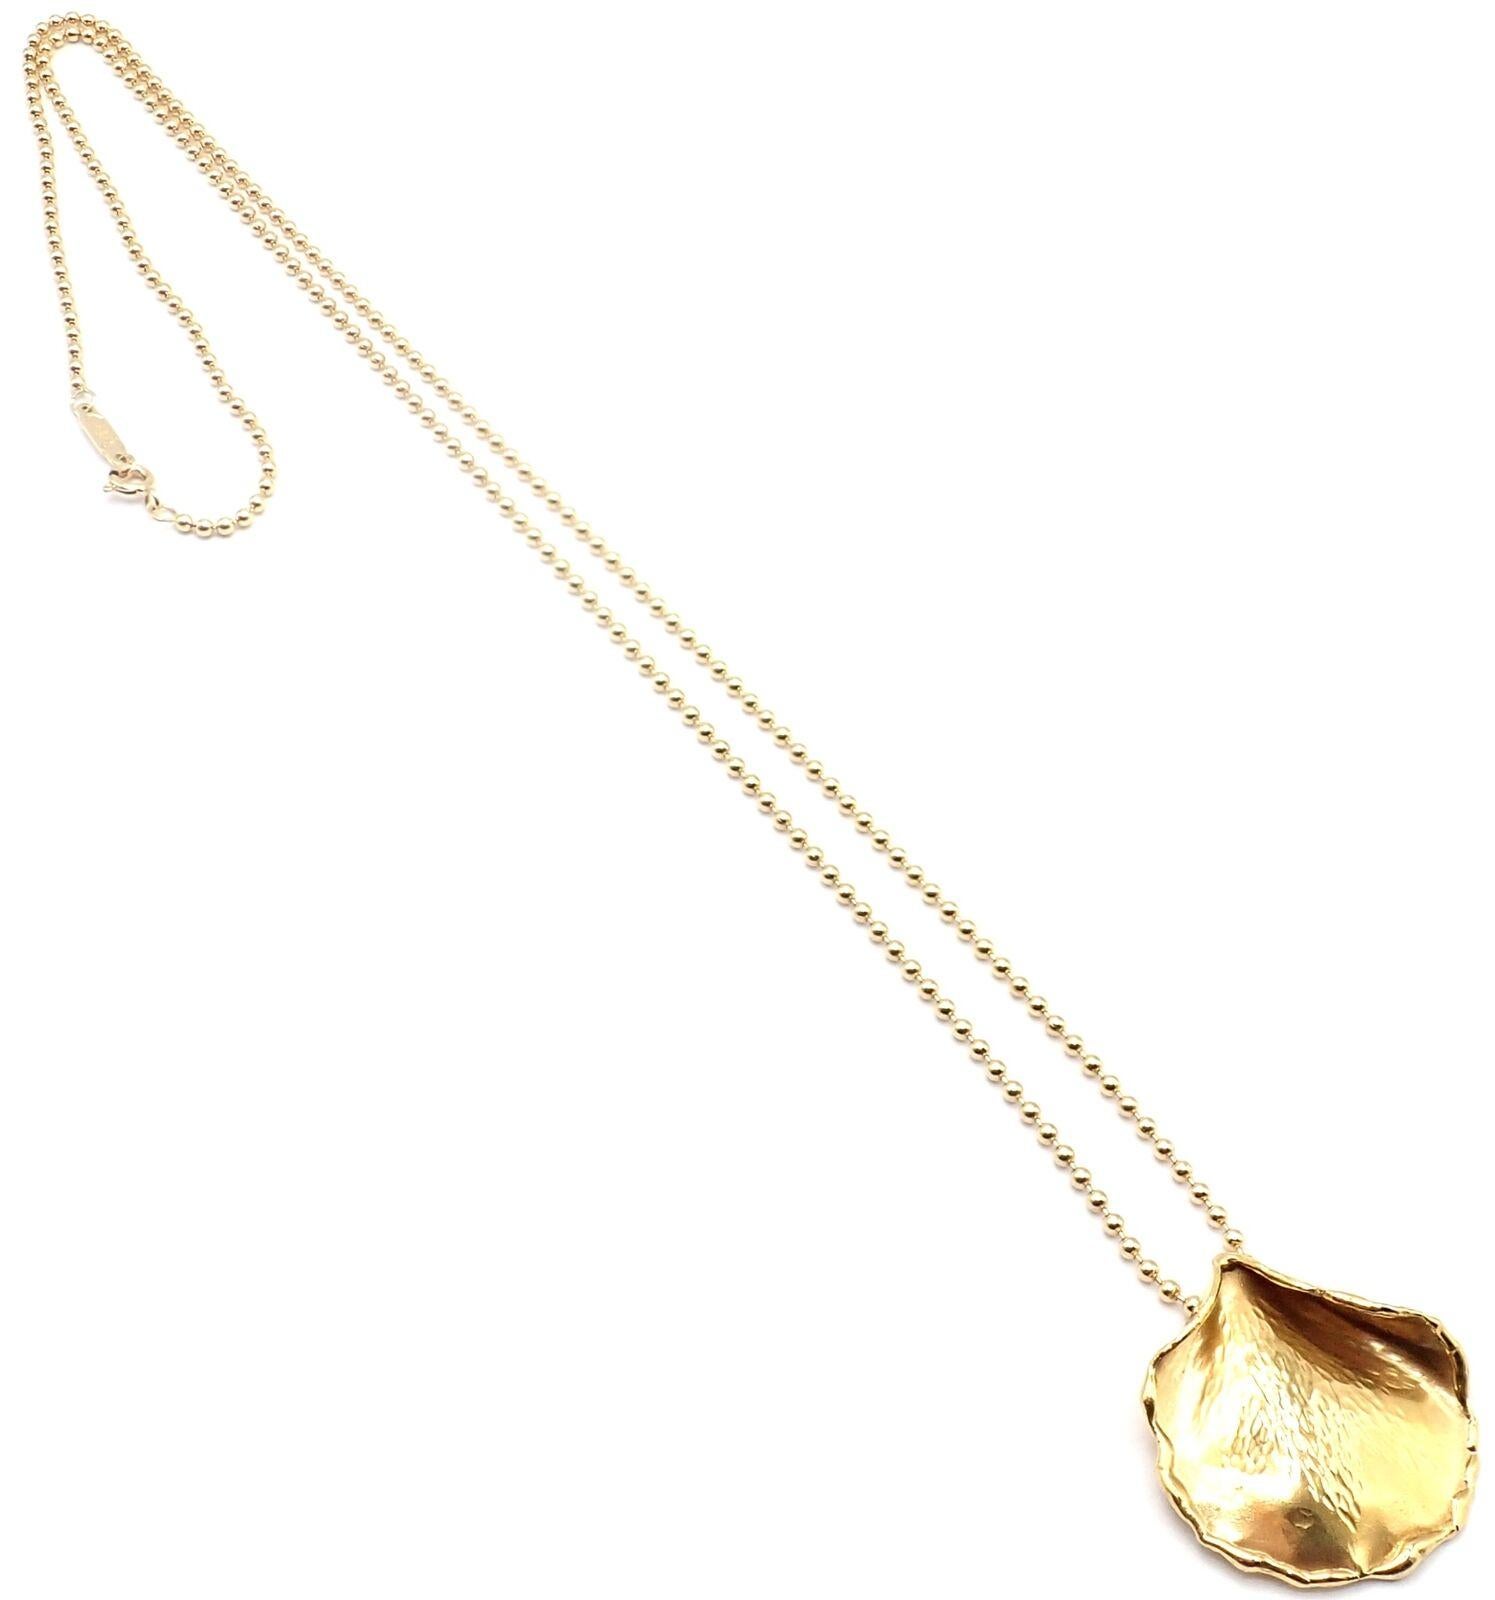 Vintage Tiffany & Co Angela Cummings Rose Petal Yellow Gold Pendant Necklace In Excellent Condition For Sale In Holland, PA